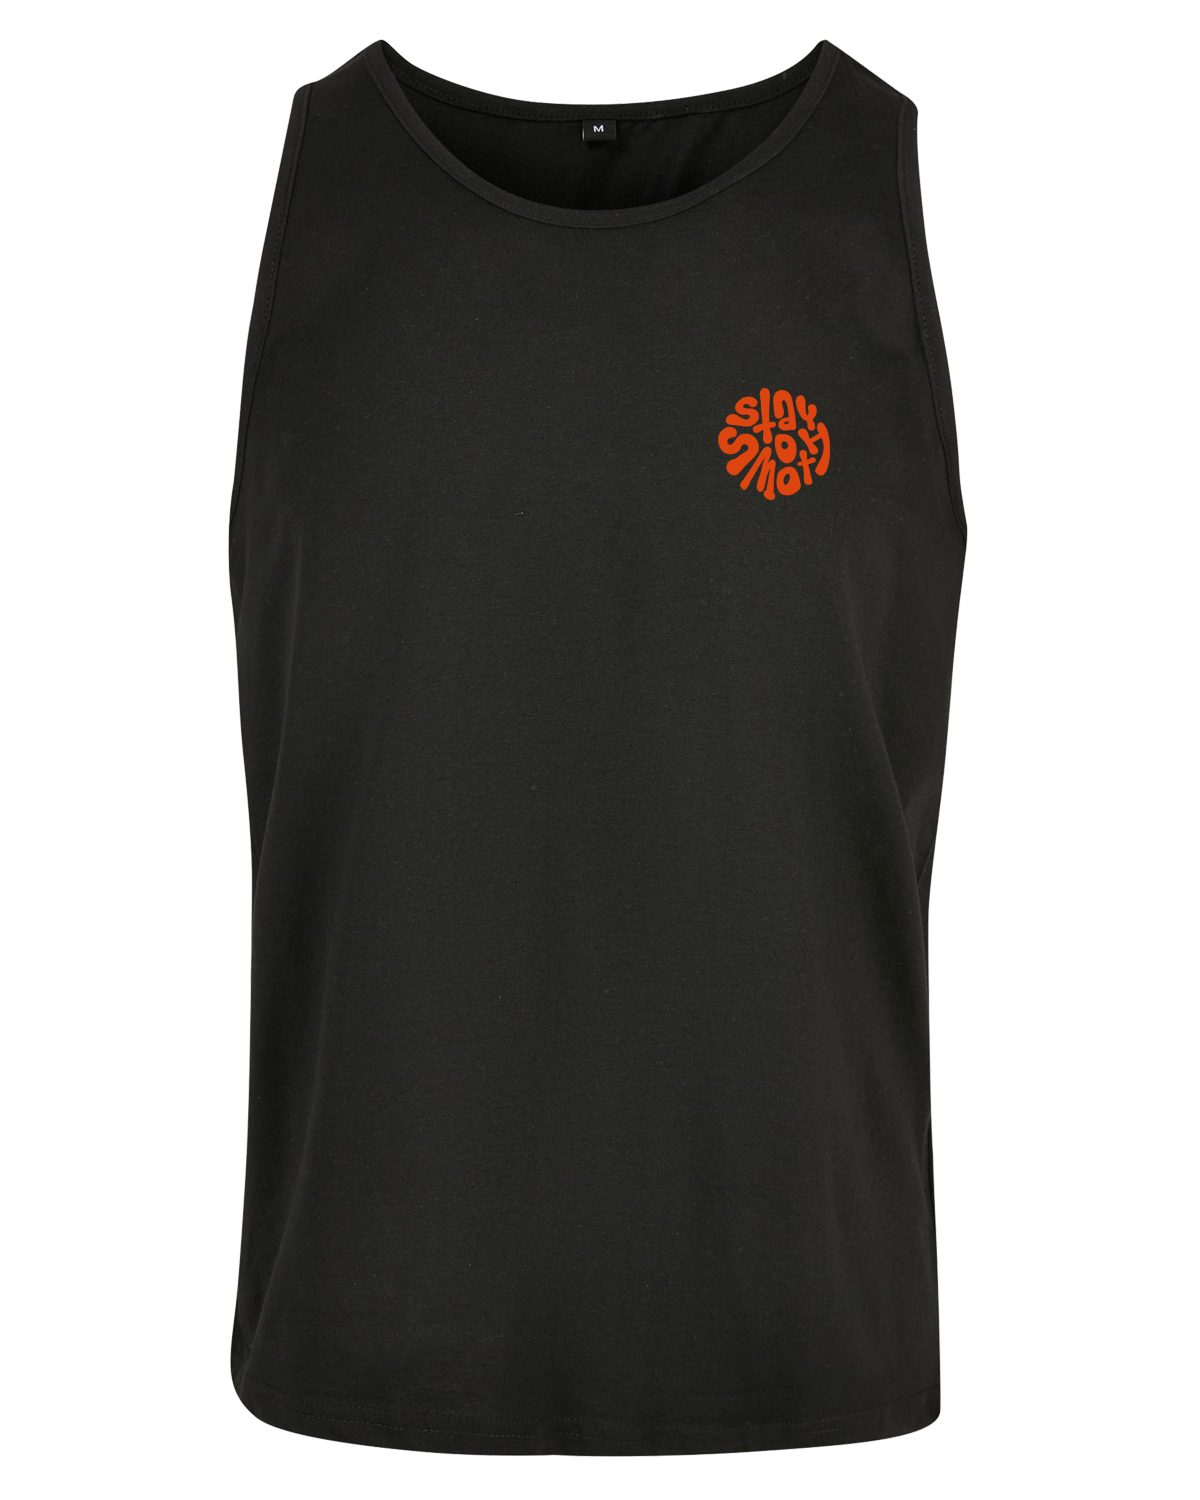 Black Top / Stay Smooth Orange Front